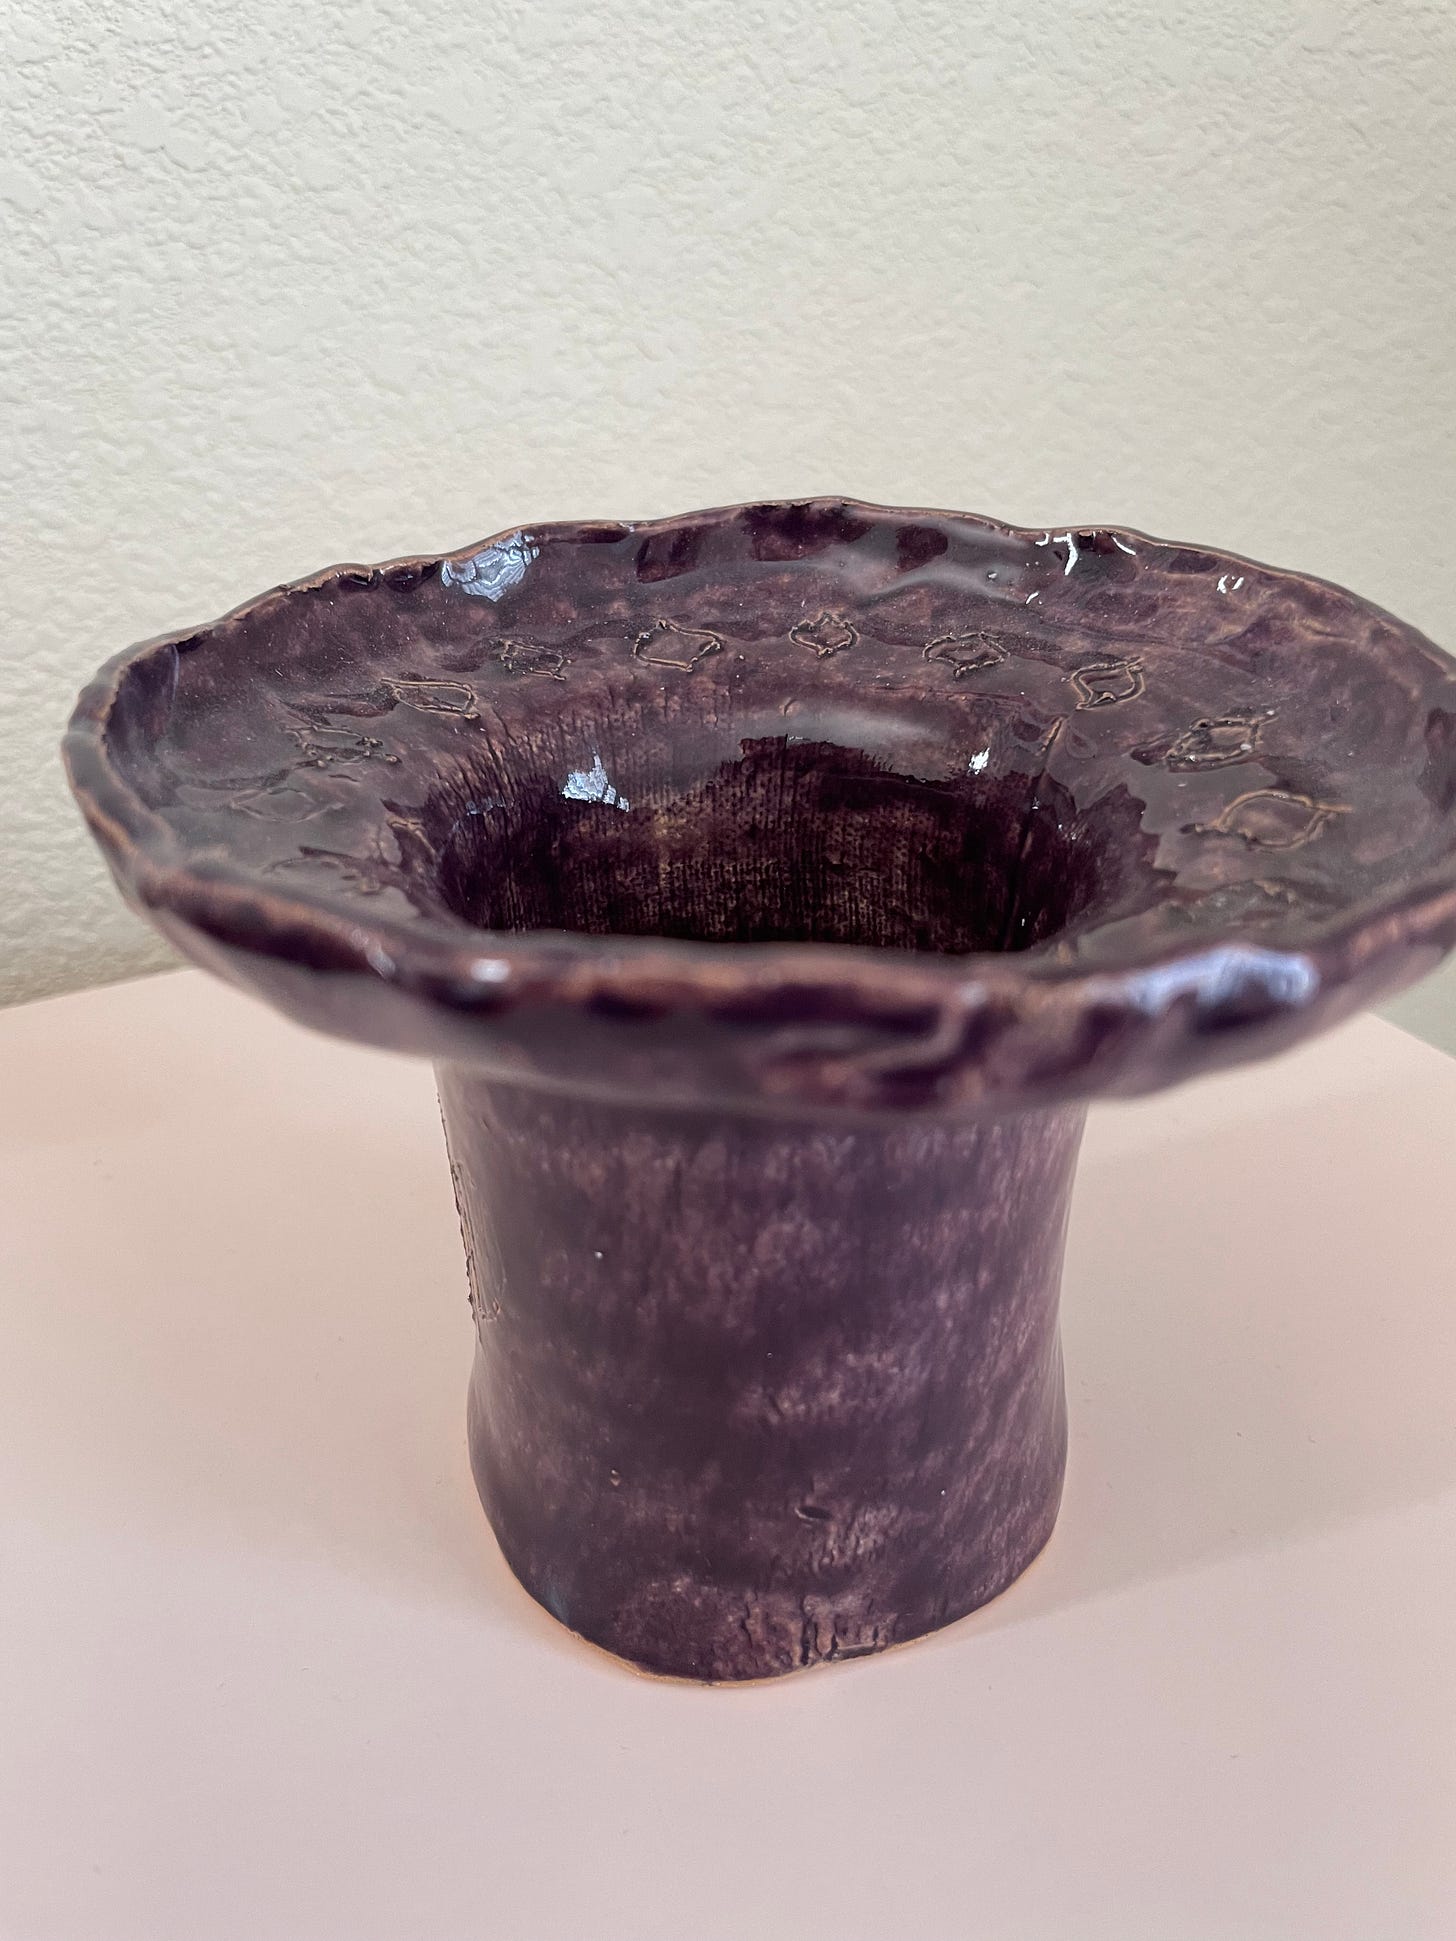 A dark purple vase-like glazed clay piece. It has little designs etched in and is atop a light pink box with a white wall in the background.